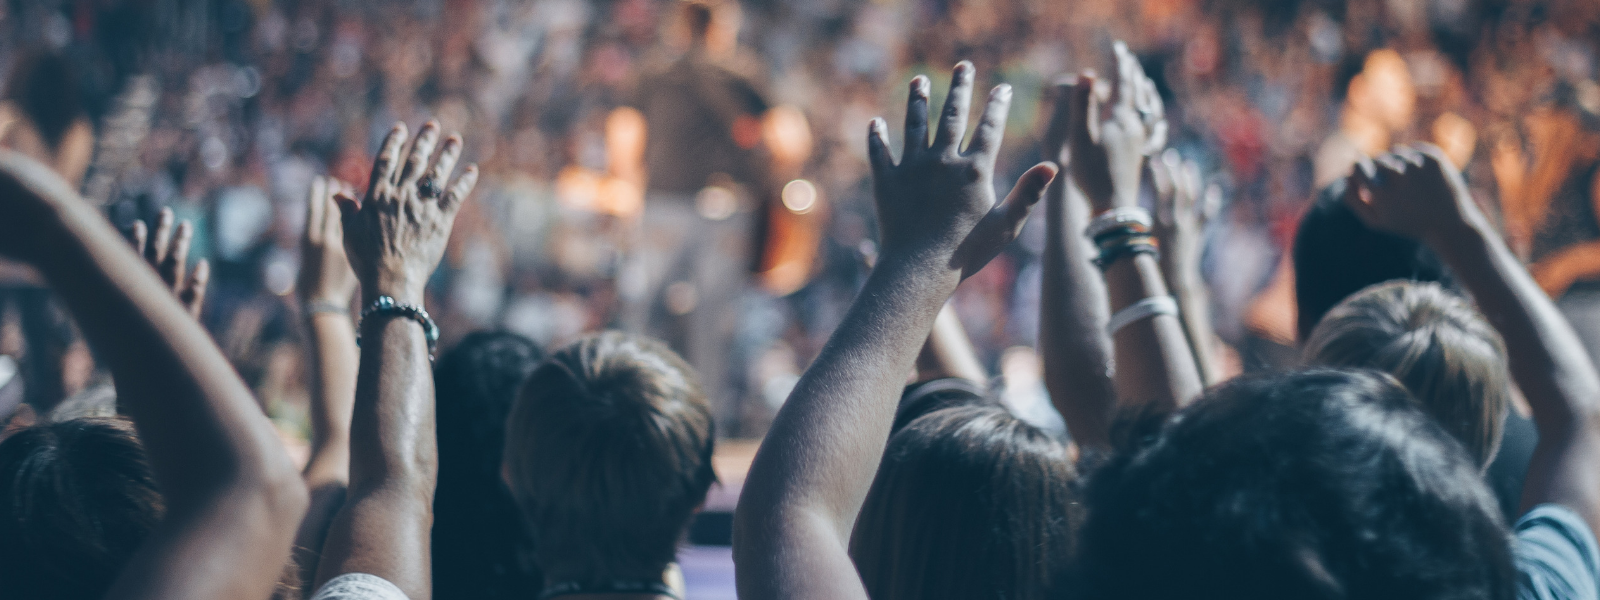 4 Ways to Mobilize Your Church to Take Social Action In the Community